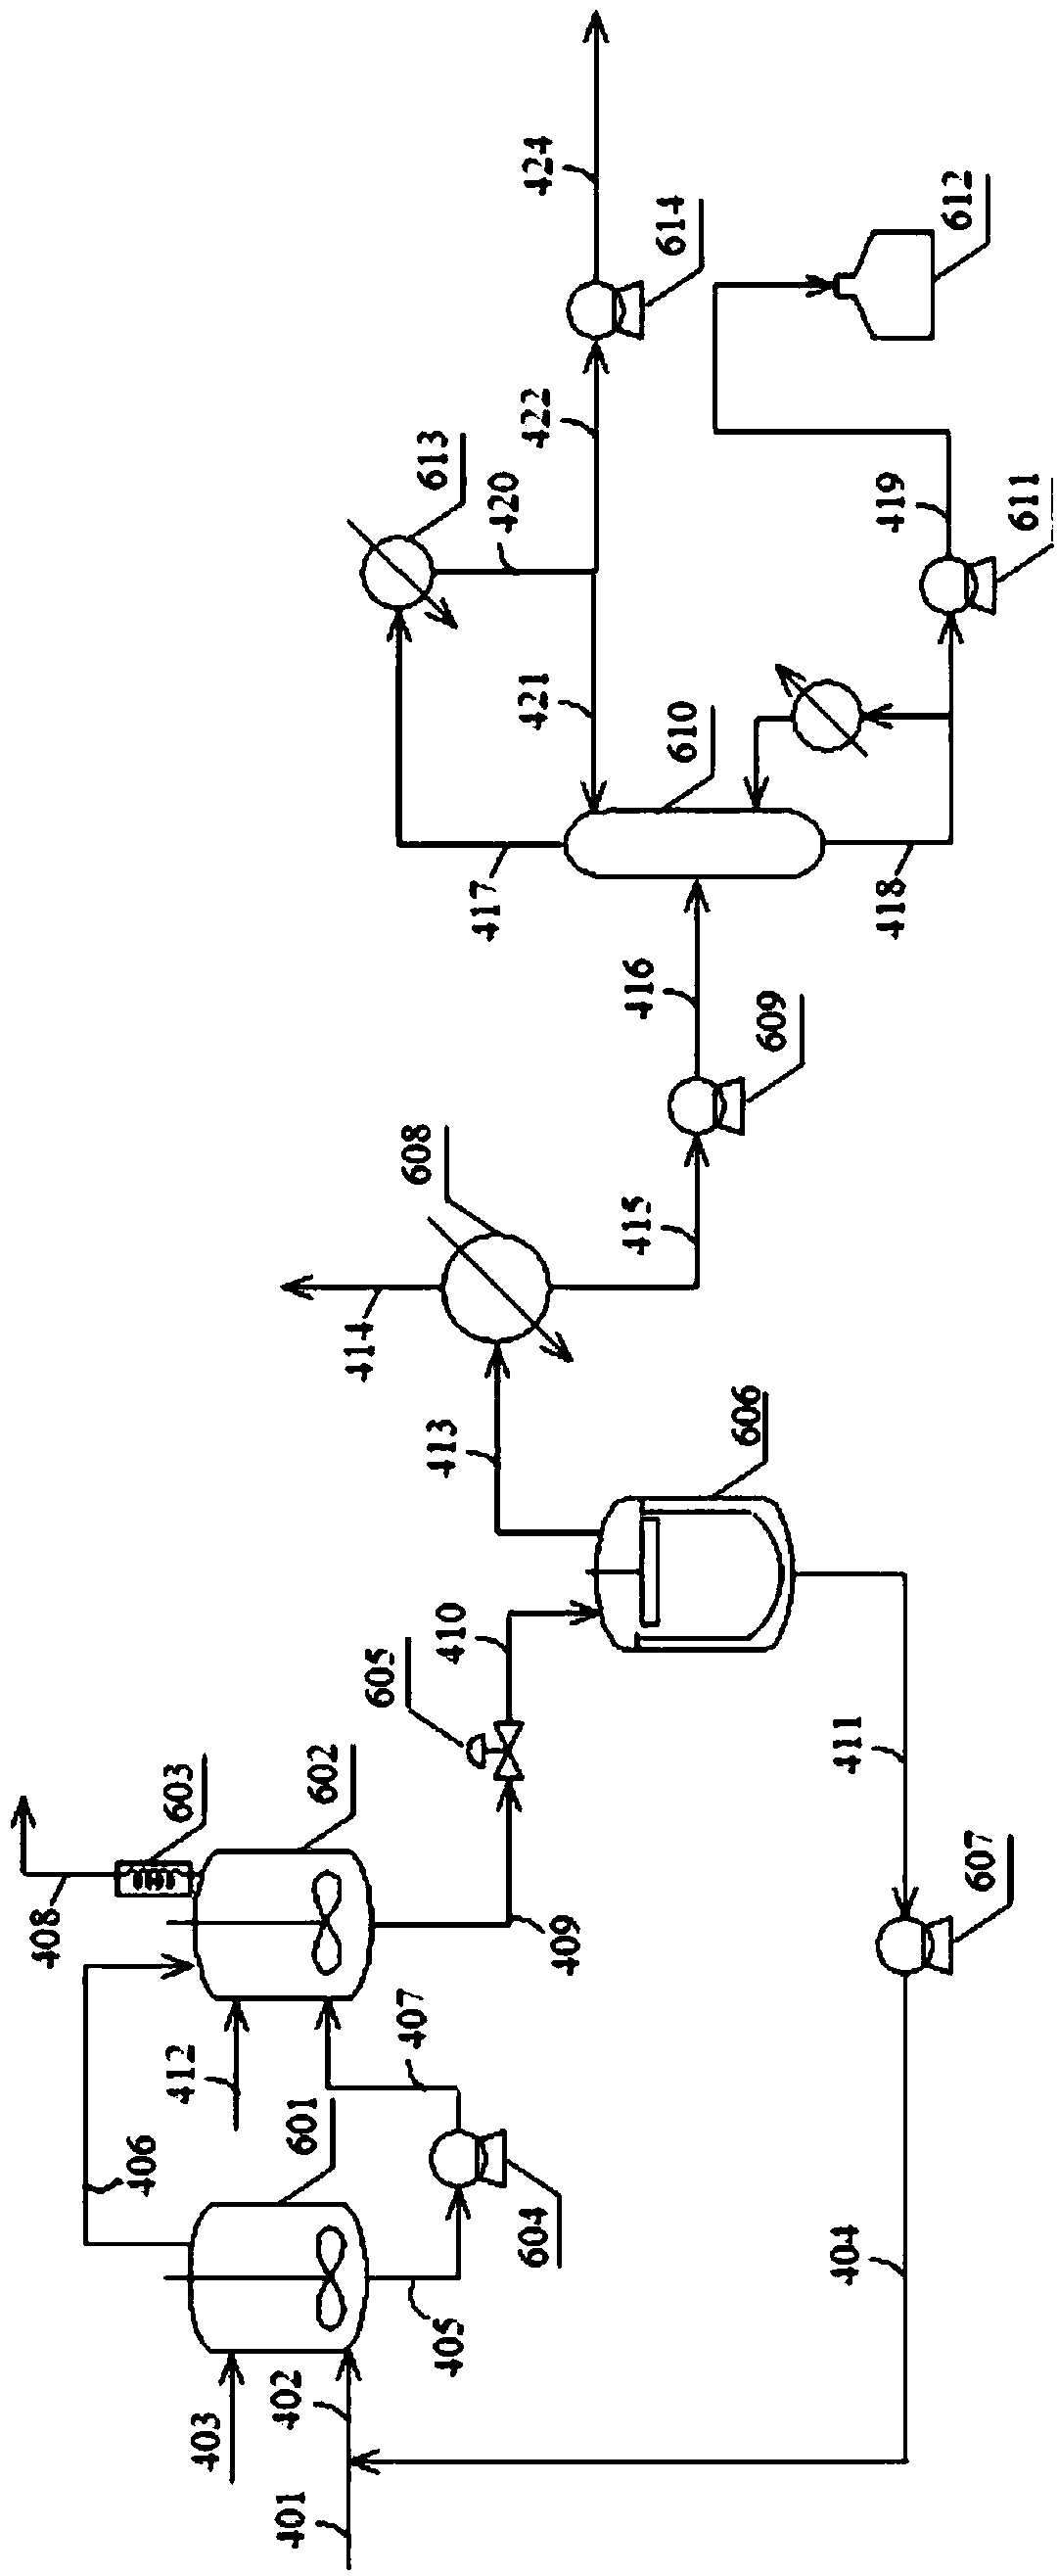 Method of conducting hydroformylation reaction on C4 mixture to prepare aldehydes